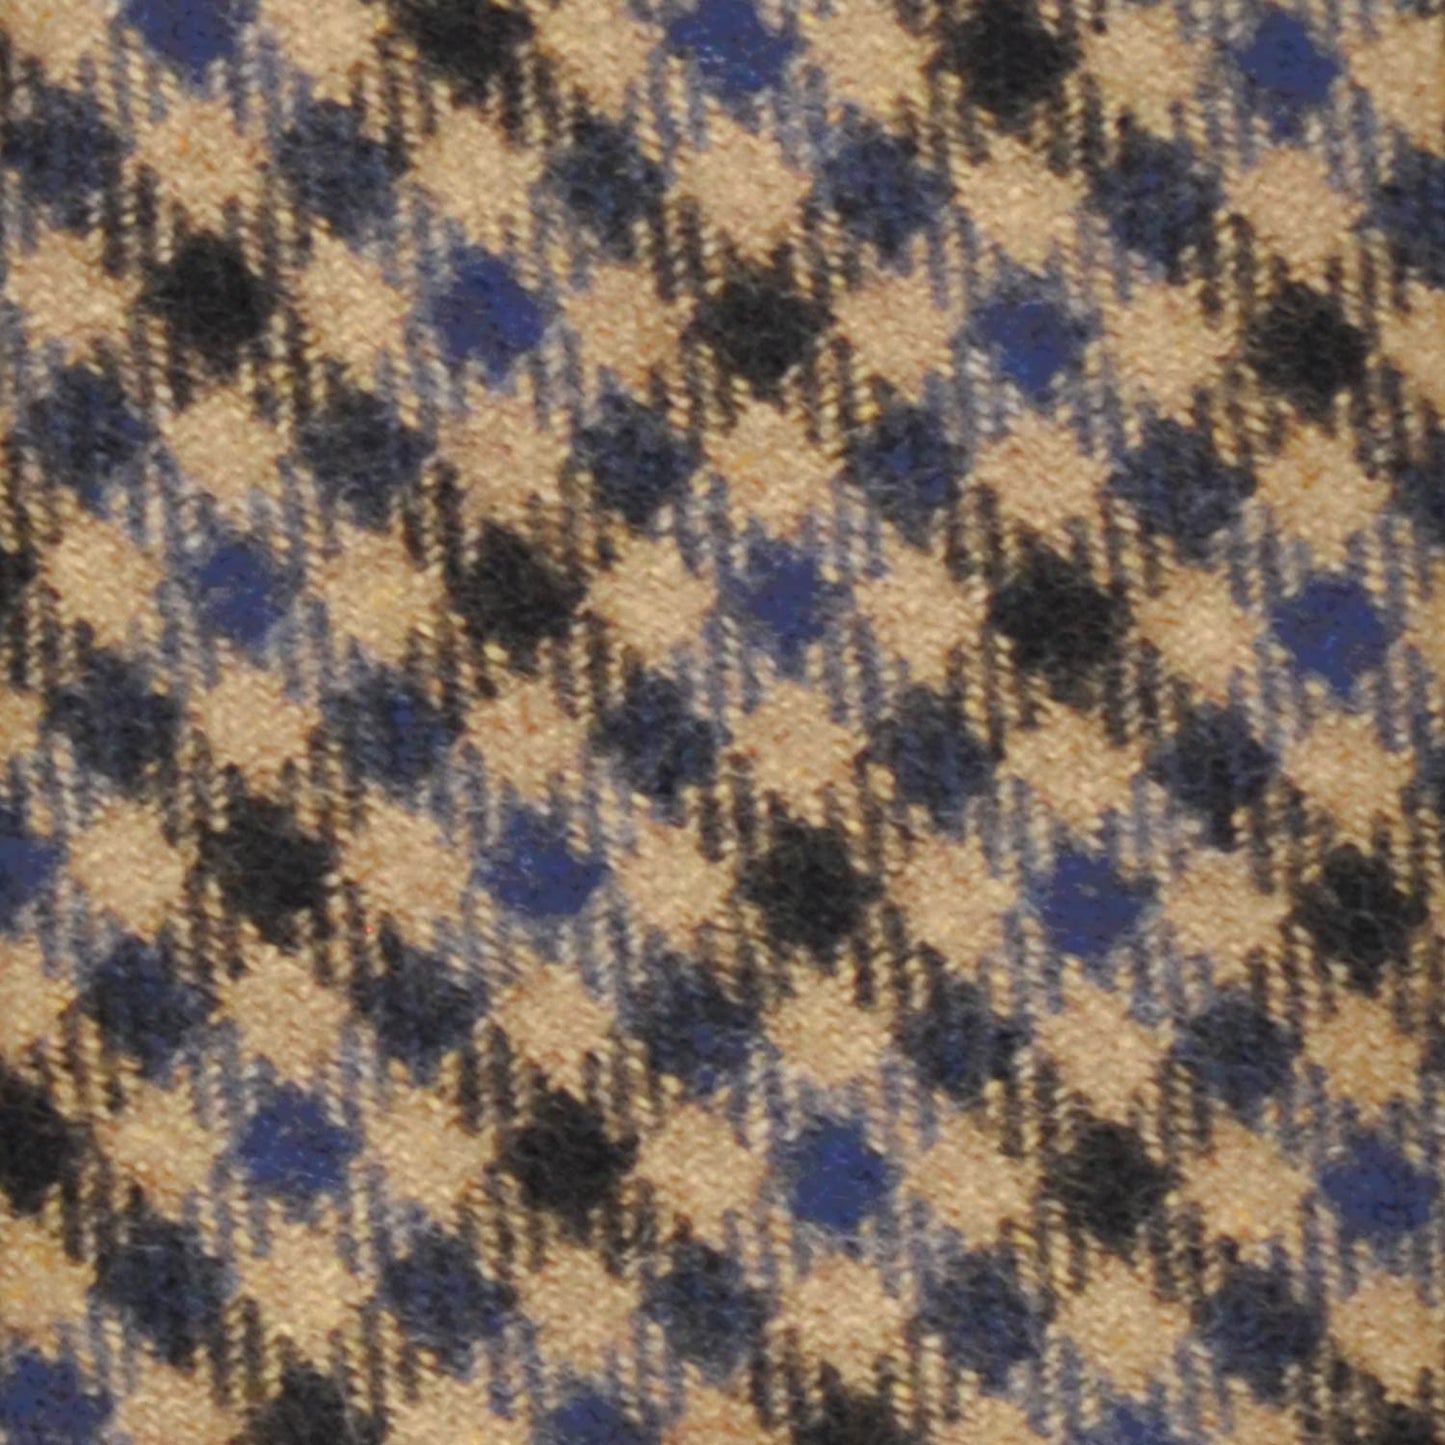 Royal Blue Checked Flannel Wool Unlined Tie.